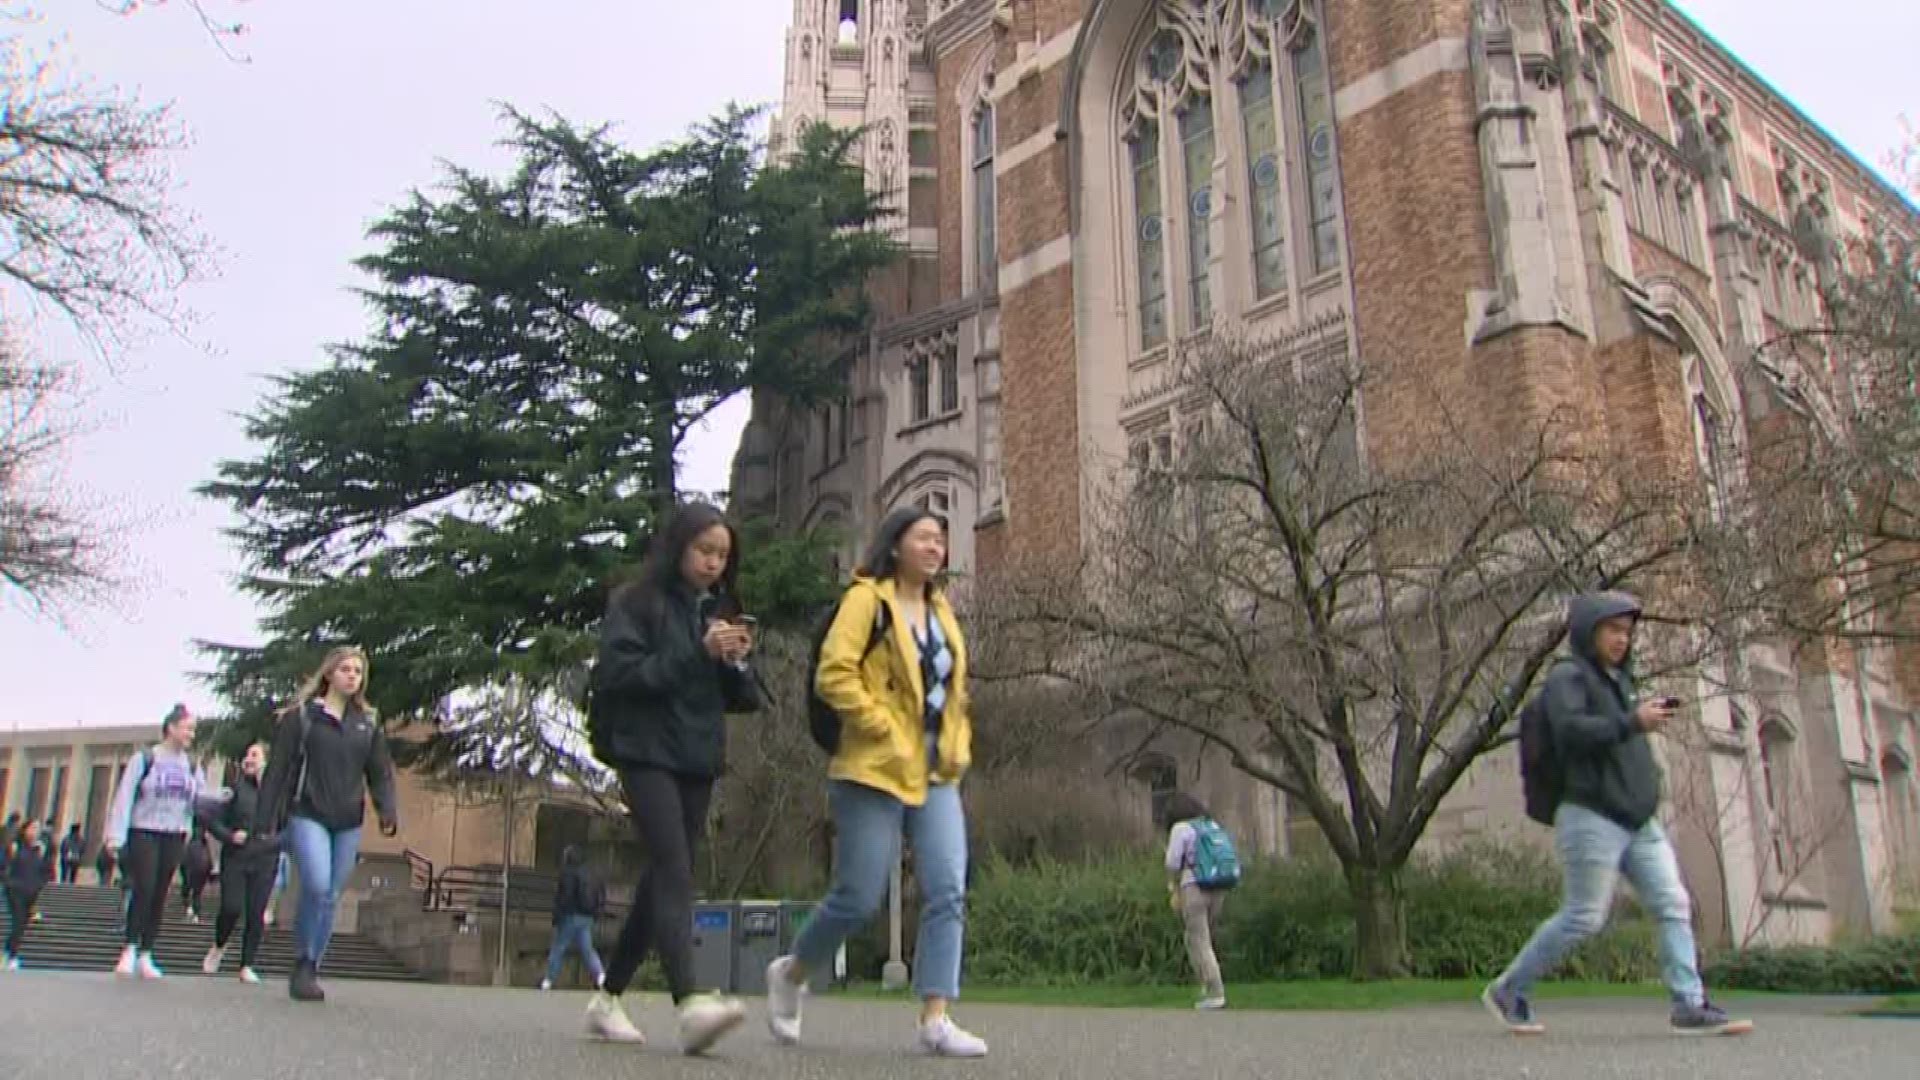 Administrators say the decision came before they learned of a University of Washington staff member who tested positive for 2019 novel coronavirus.